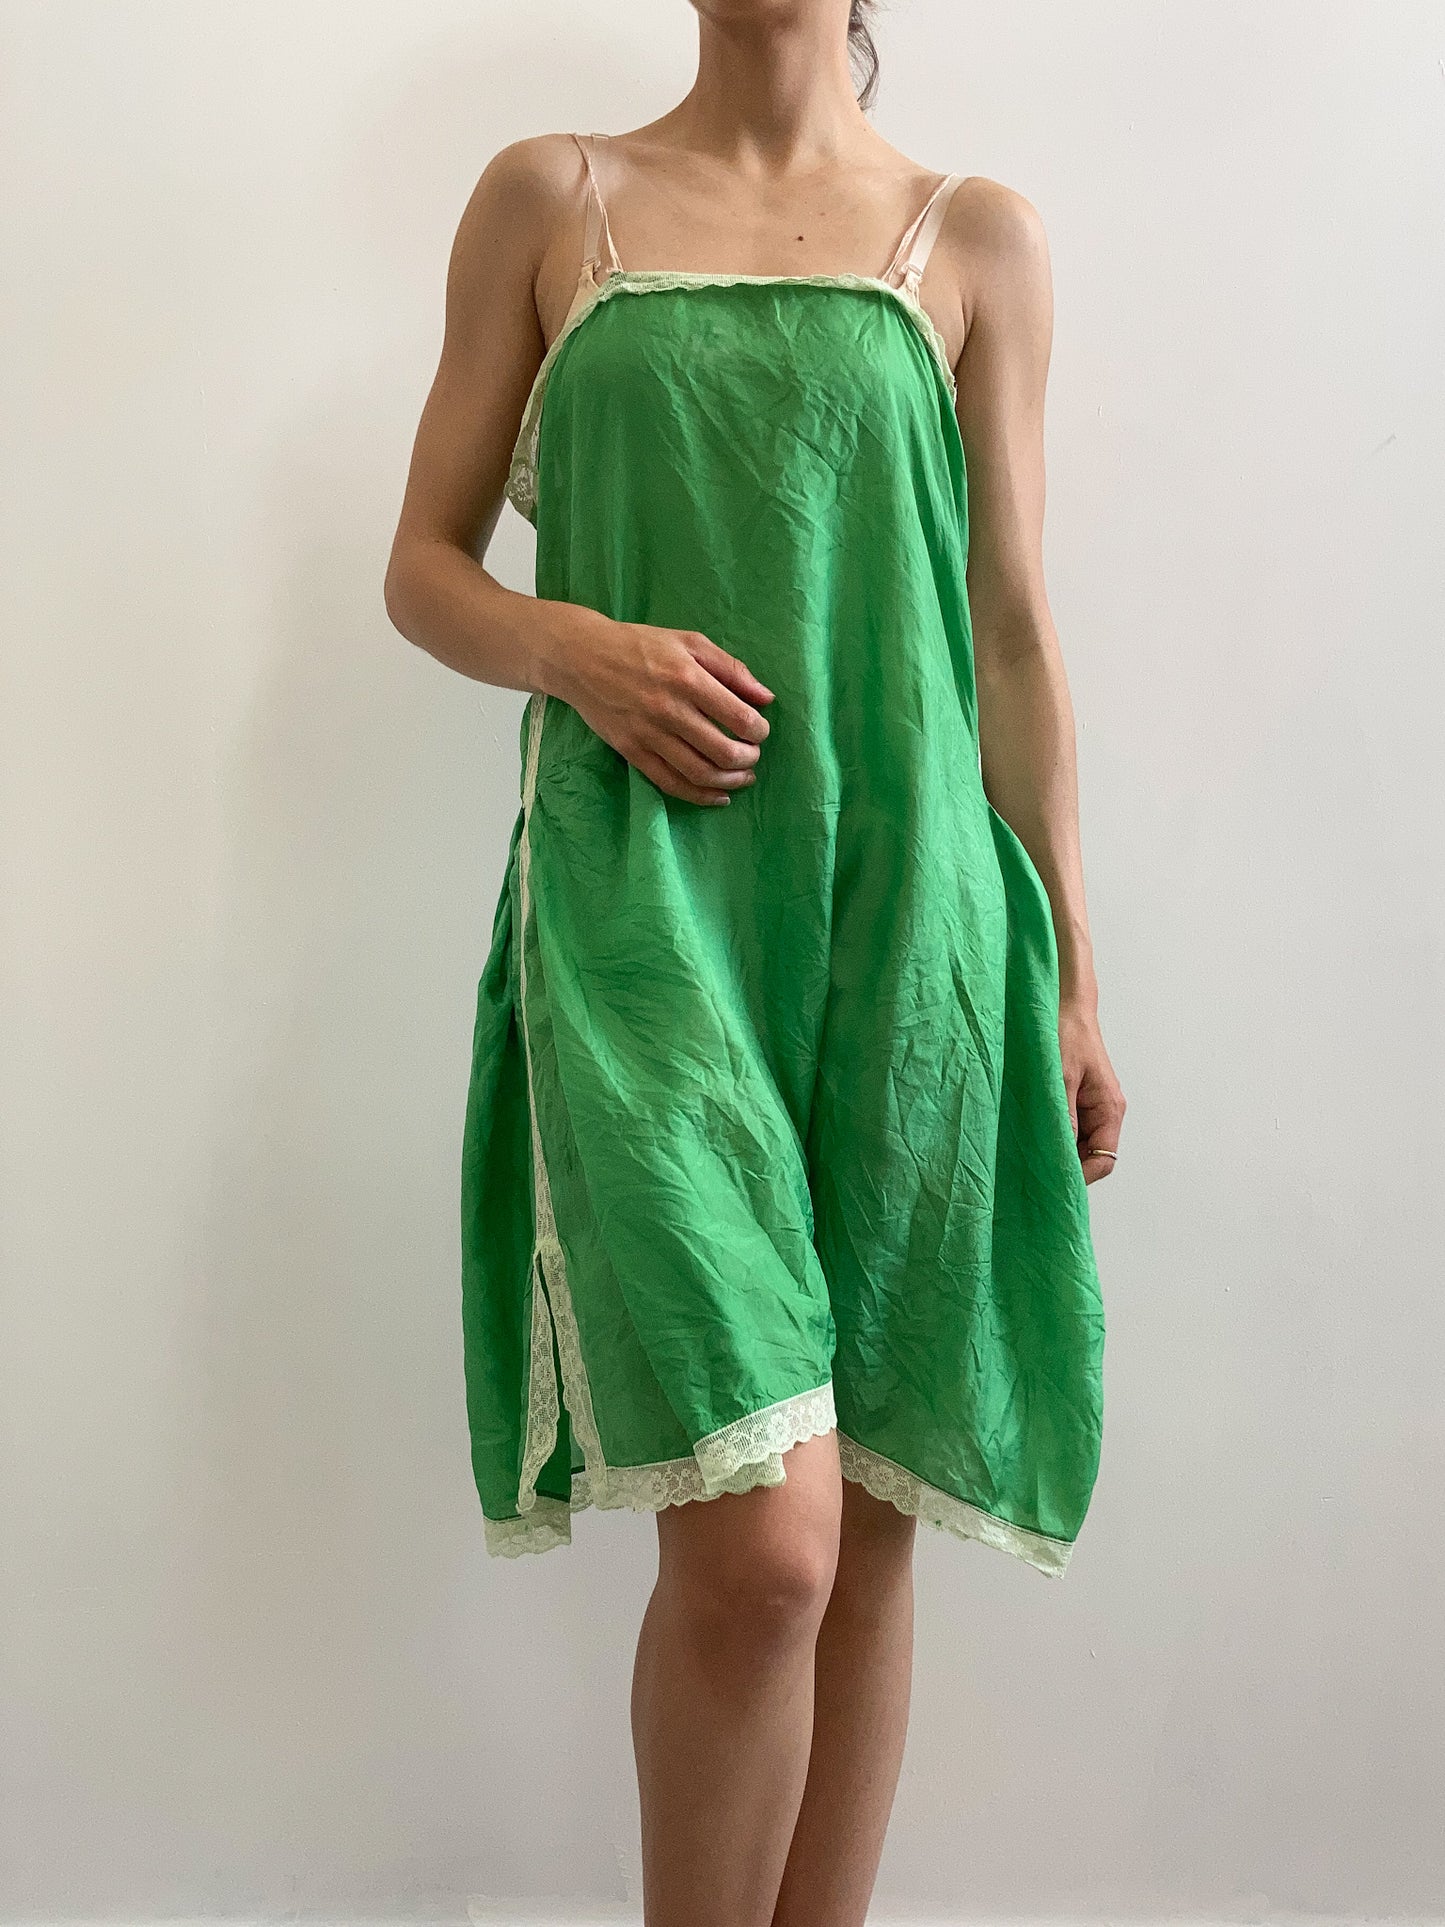 1920s Gossamer Silk & Lace Dyed Playsuit - Emerald